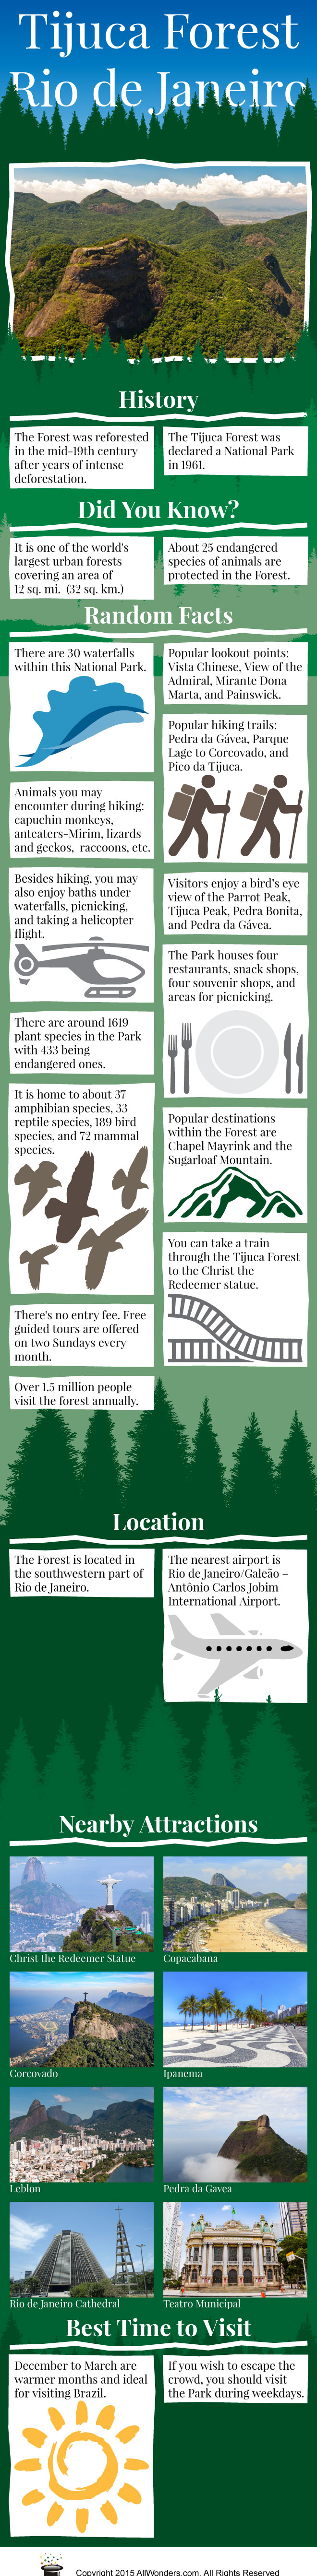 Tijuca Forest Infographic